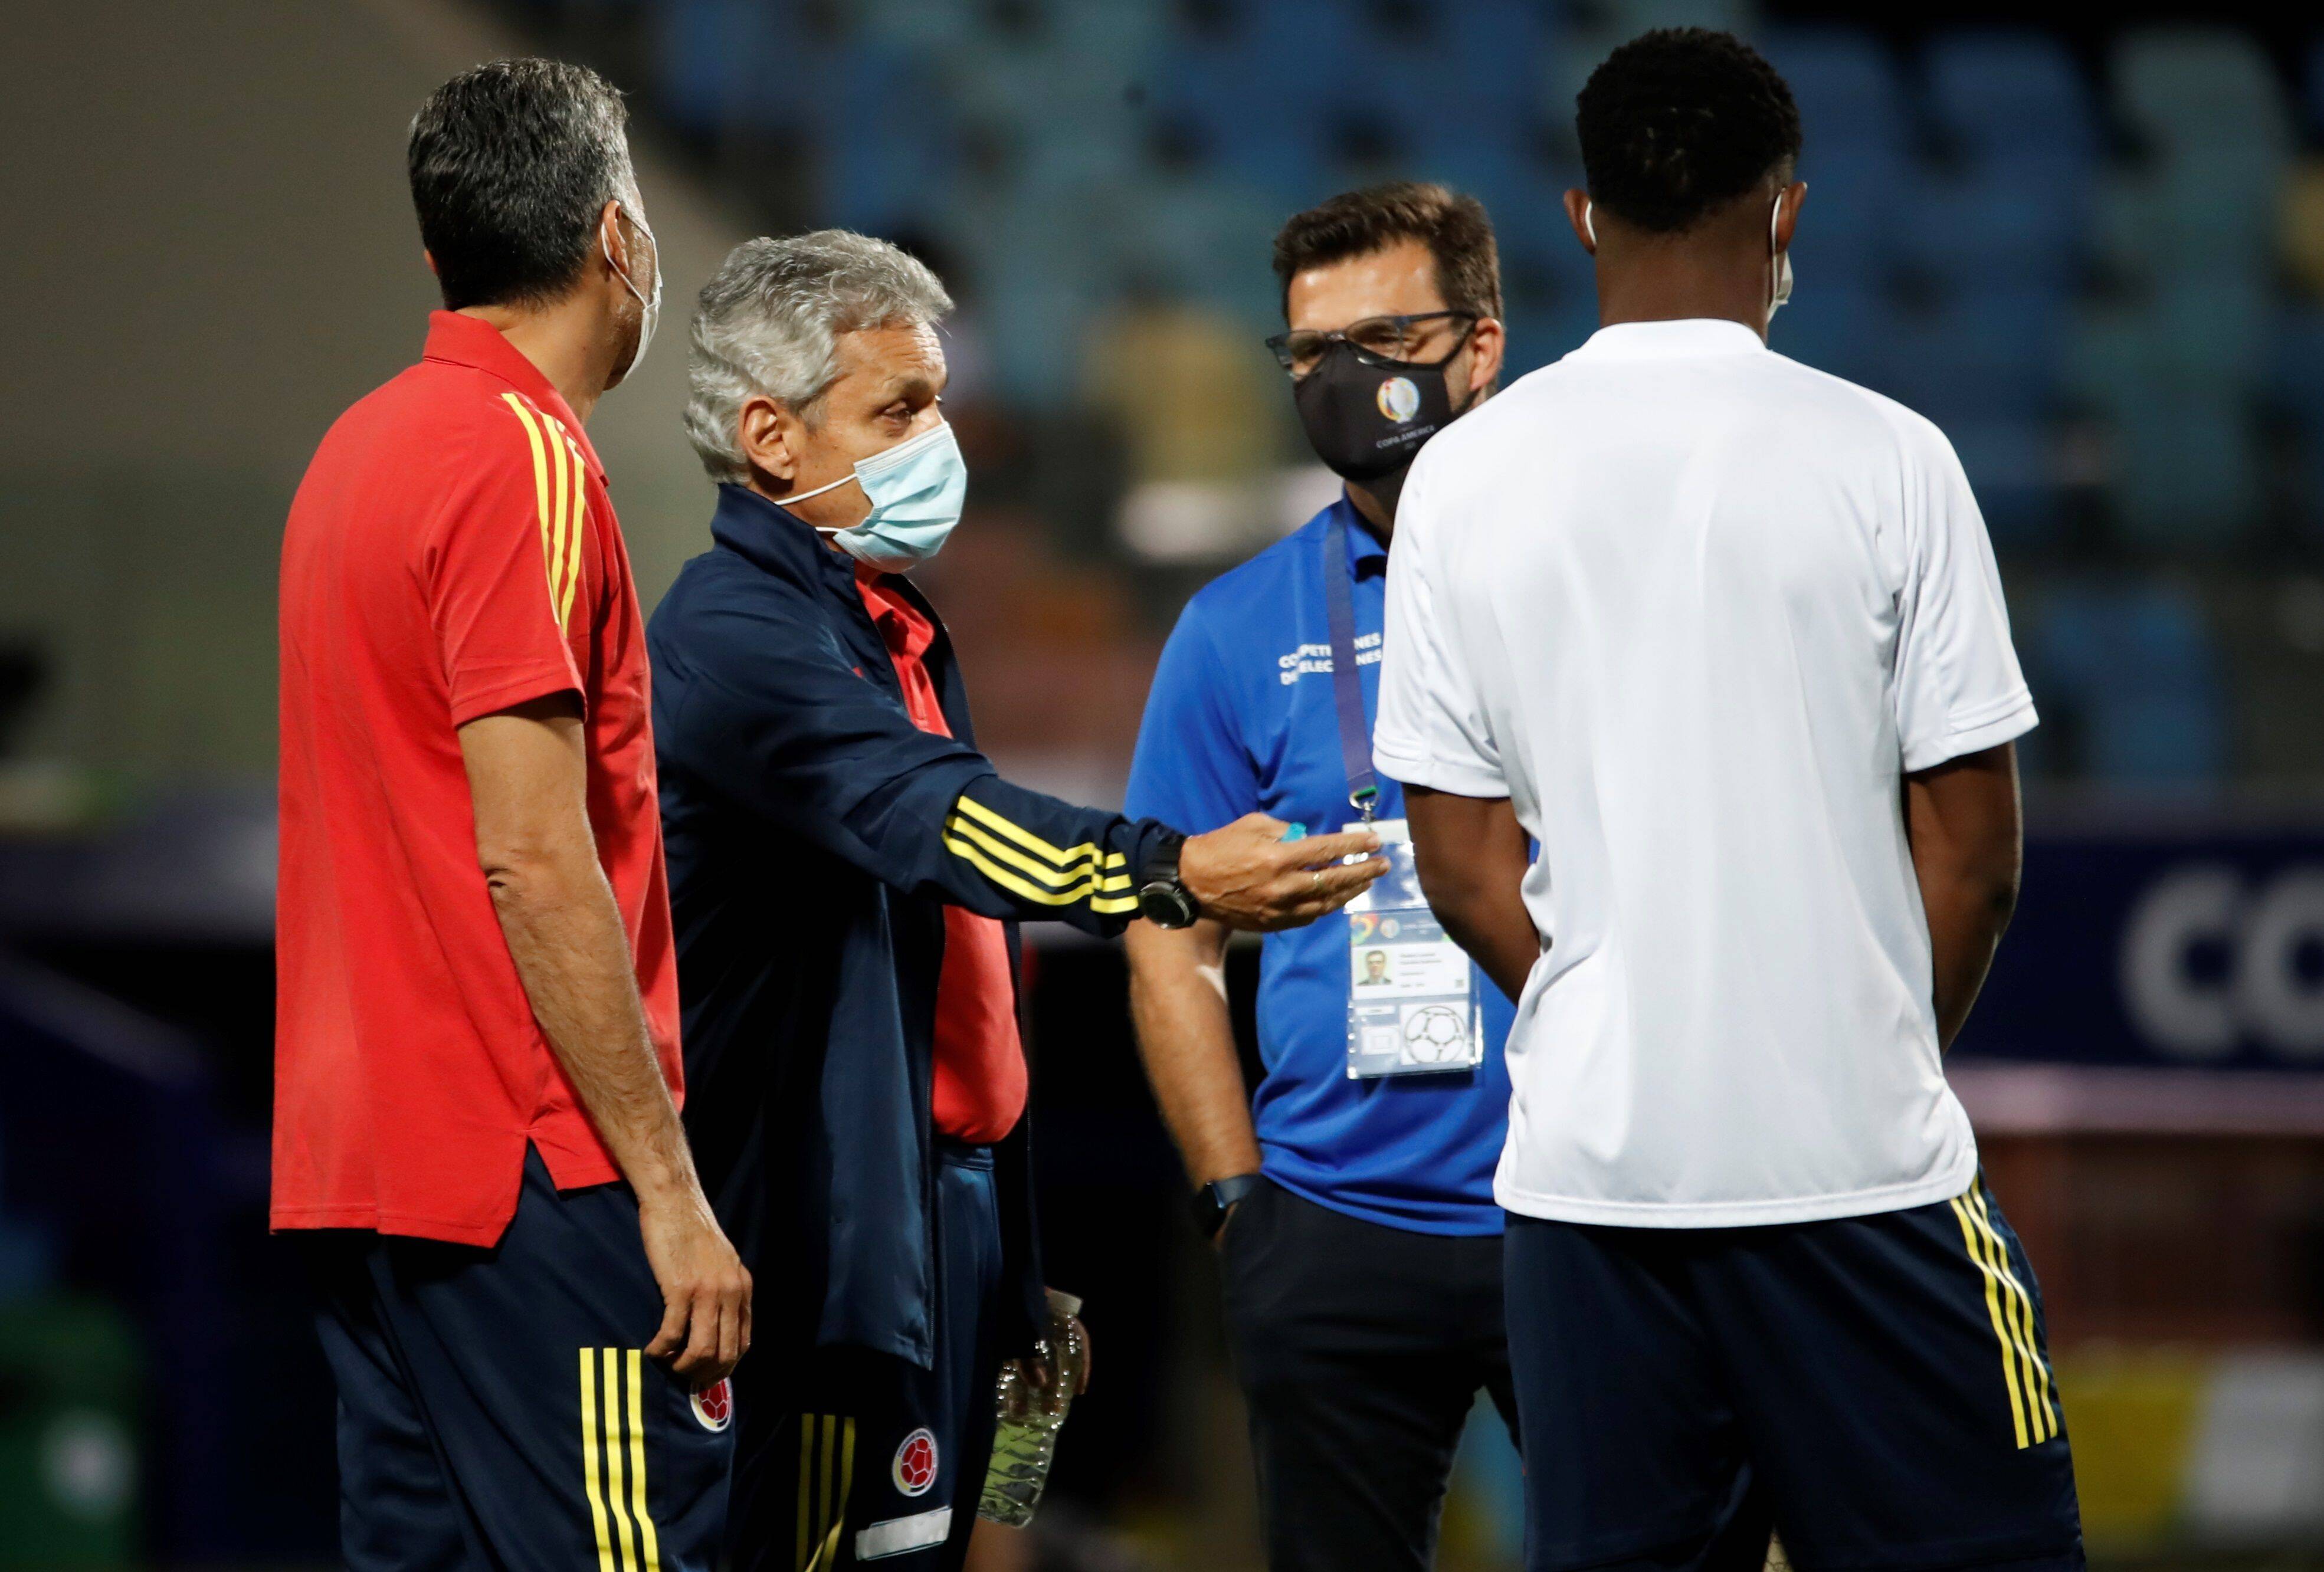 Colombia S National Soccer Team Head Coach Reinaldo Rueda (2 L) And Player Oscar Murillo (r) During Their Visit To Olymp